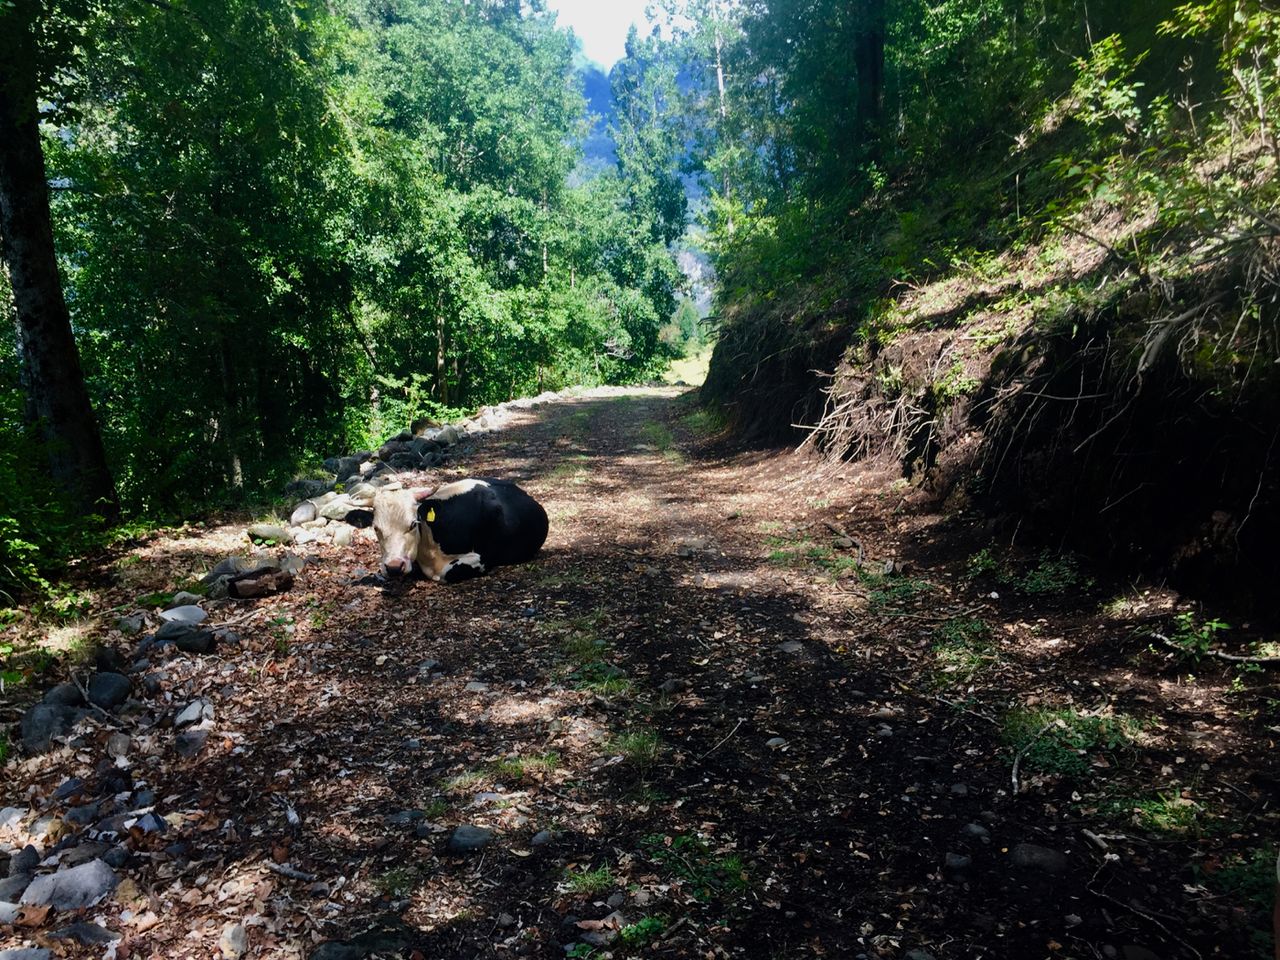 Cow laying on a path in the shade.